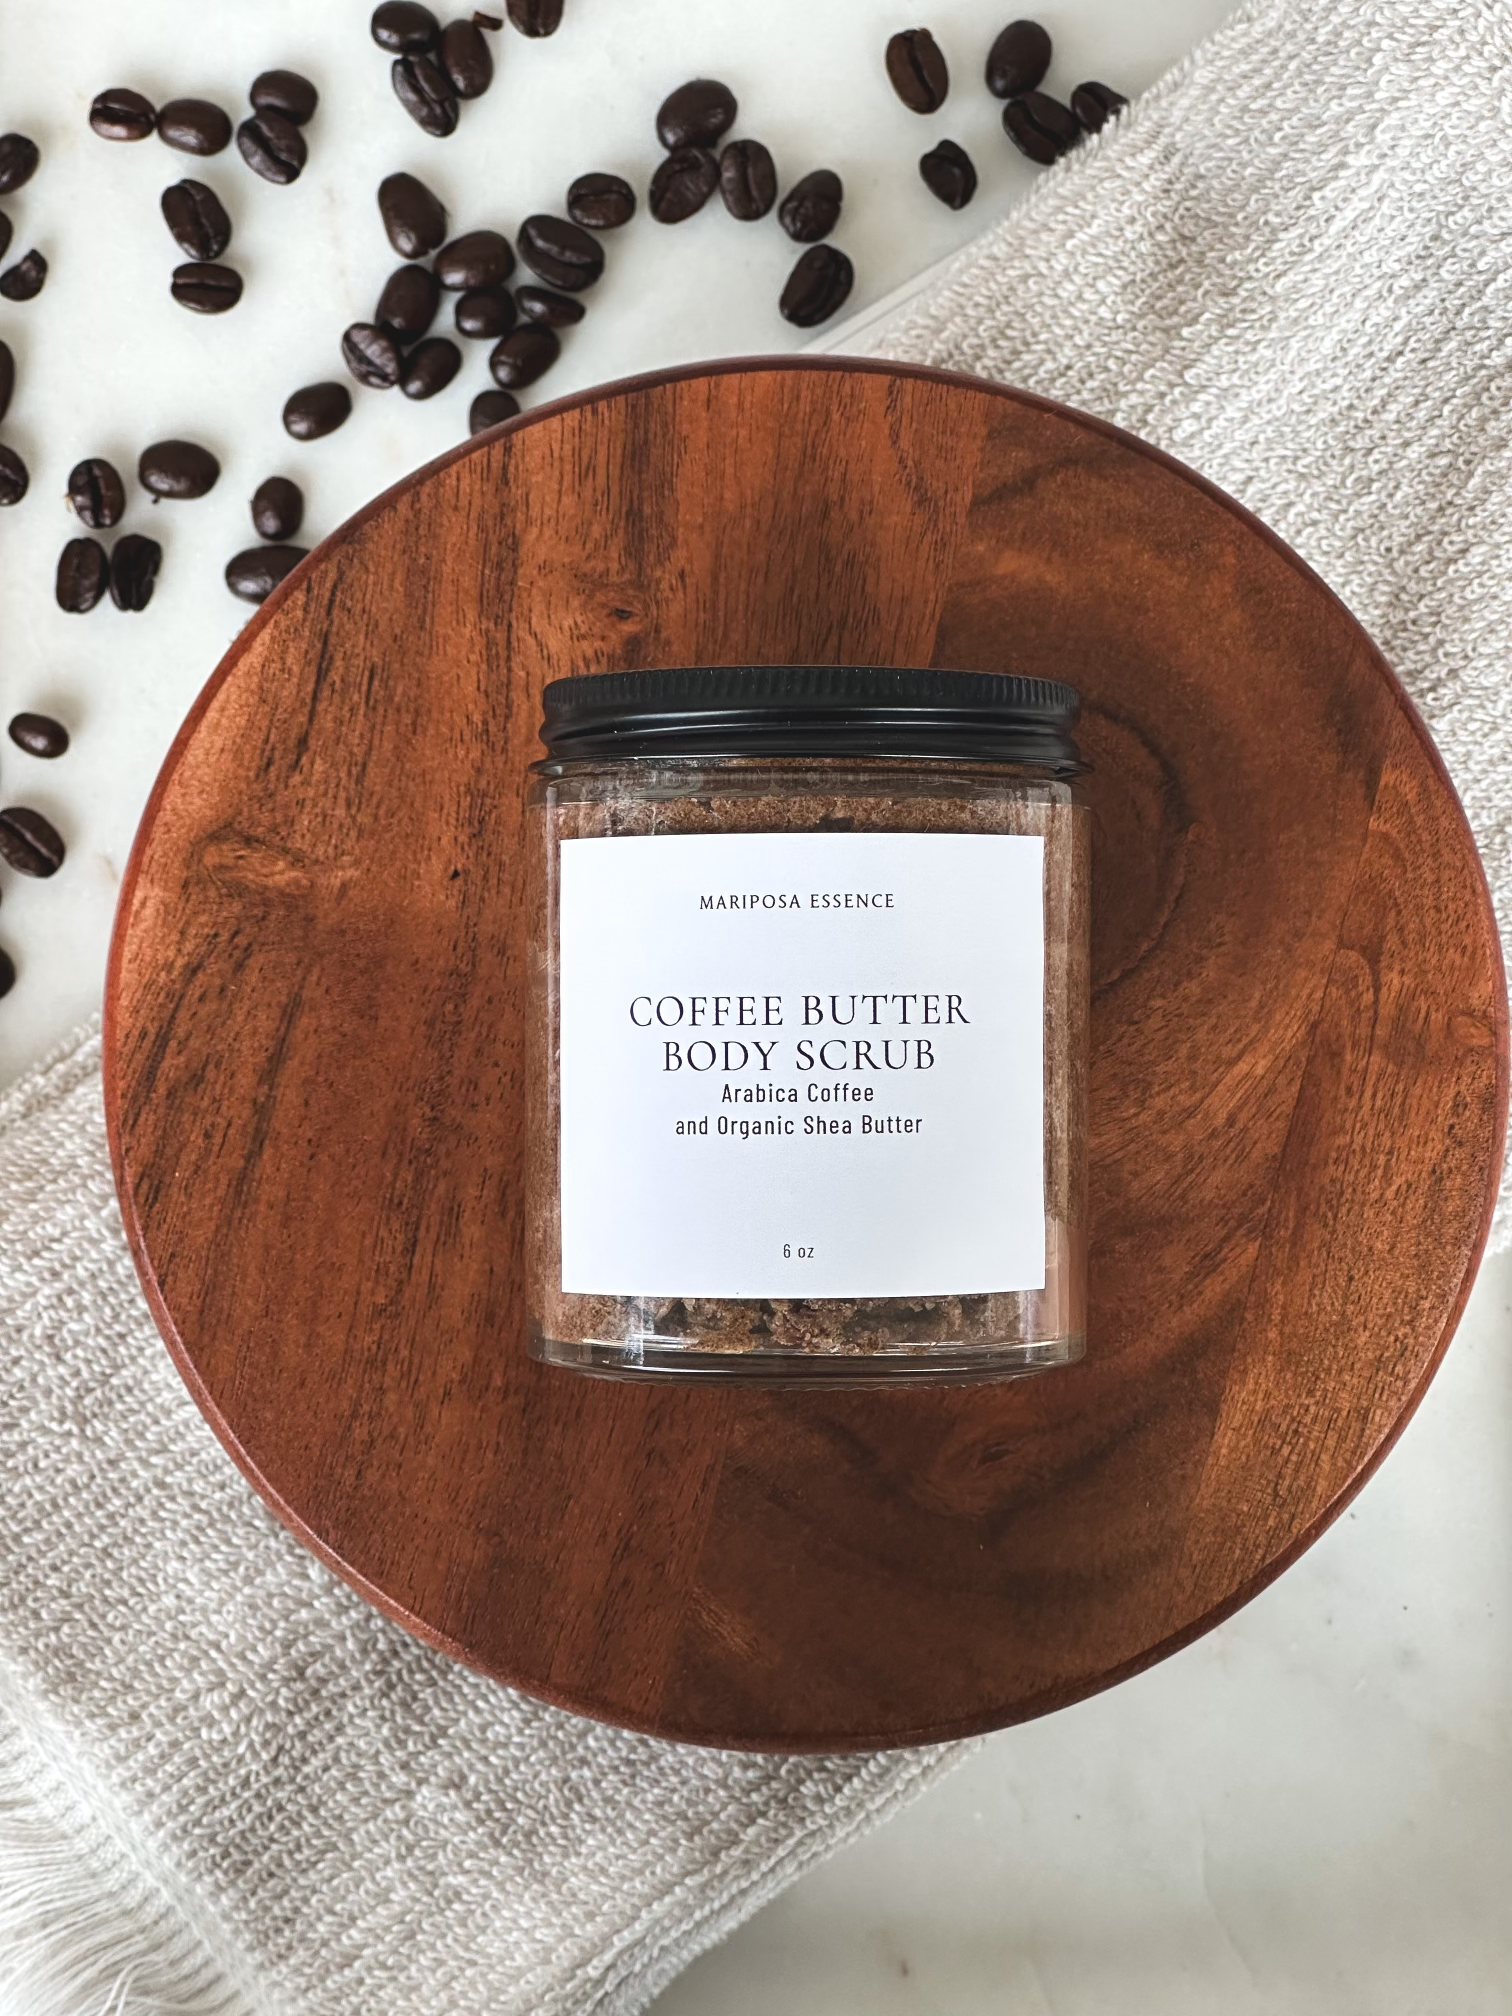 Coffee butter body scrub displayed with coffee beans